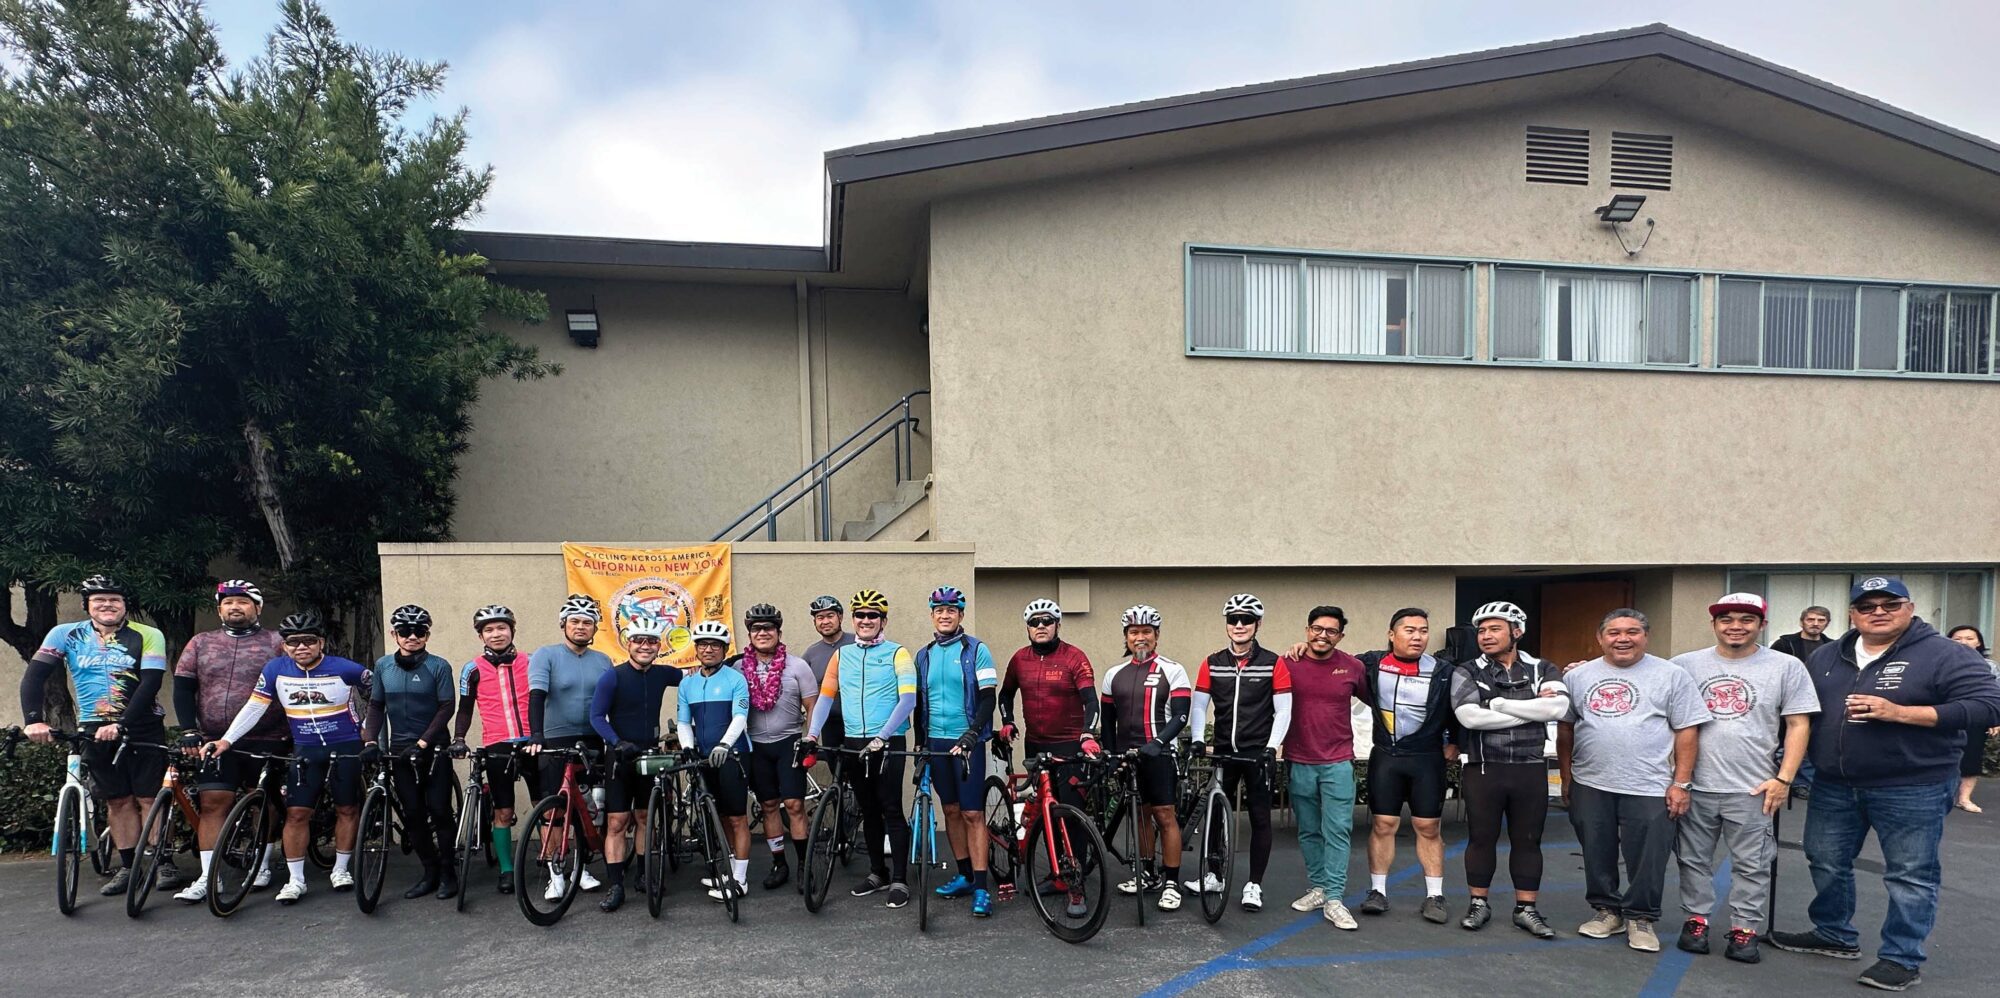 Dave Romero of Pacific Rim no. 567 led a Masonic charity bike ride from Los Angeles to Pennsylvania to raise money for the Masonic Homes of California.